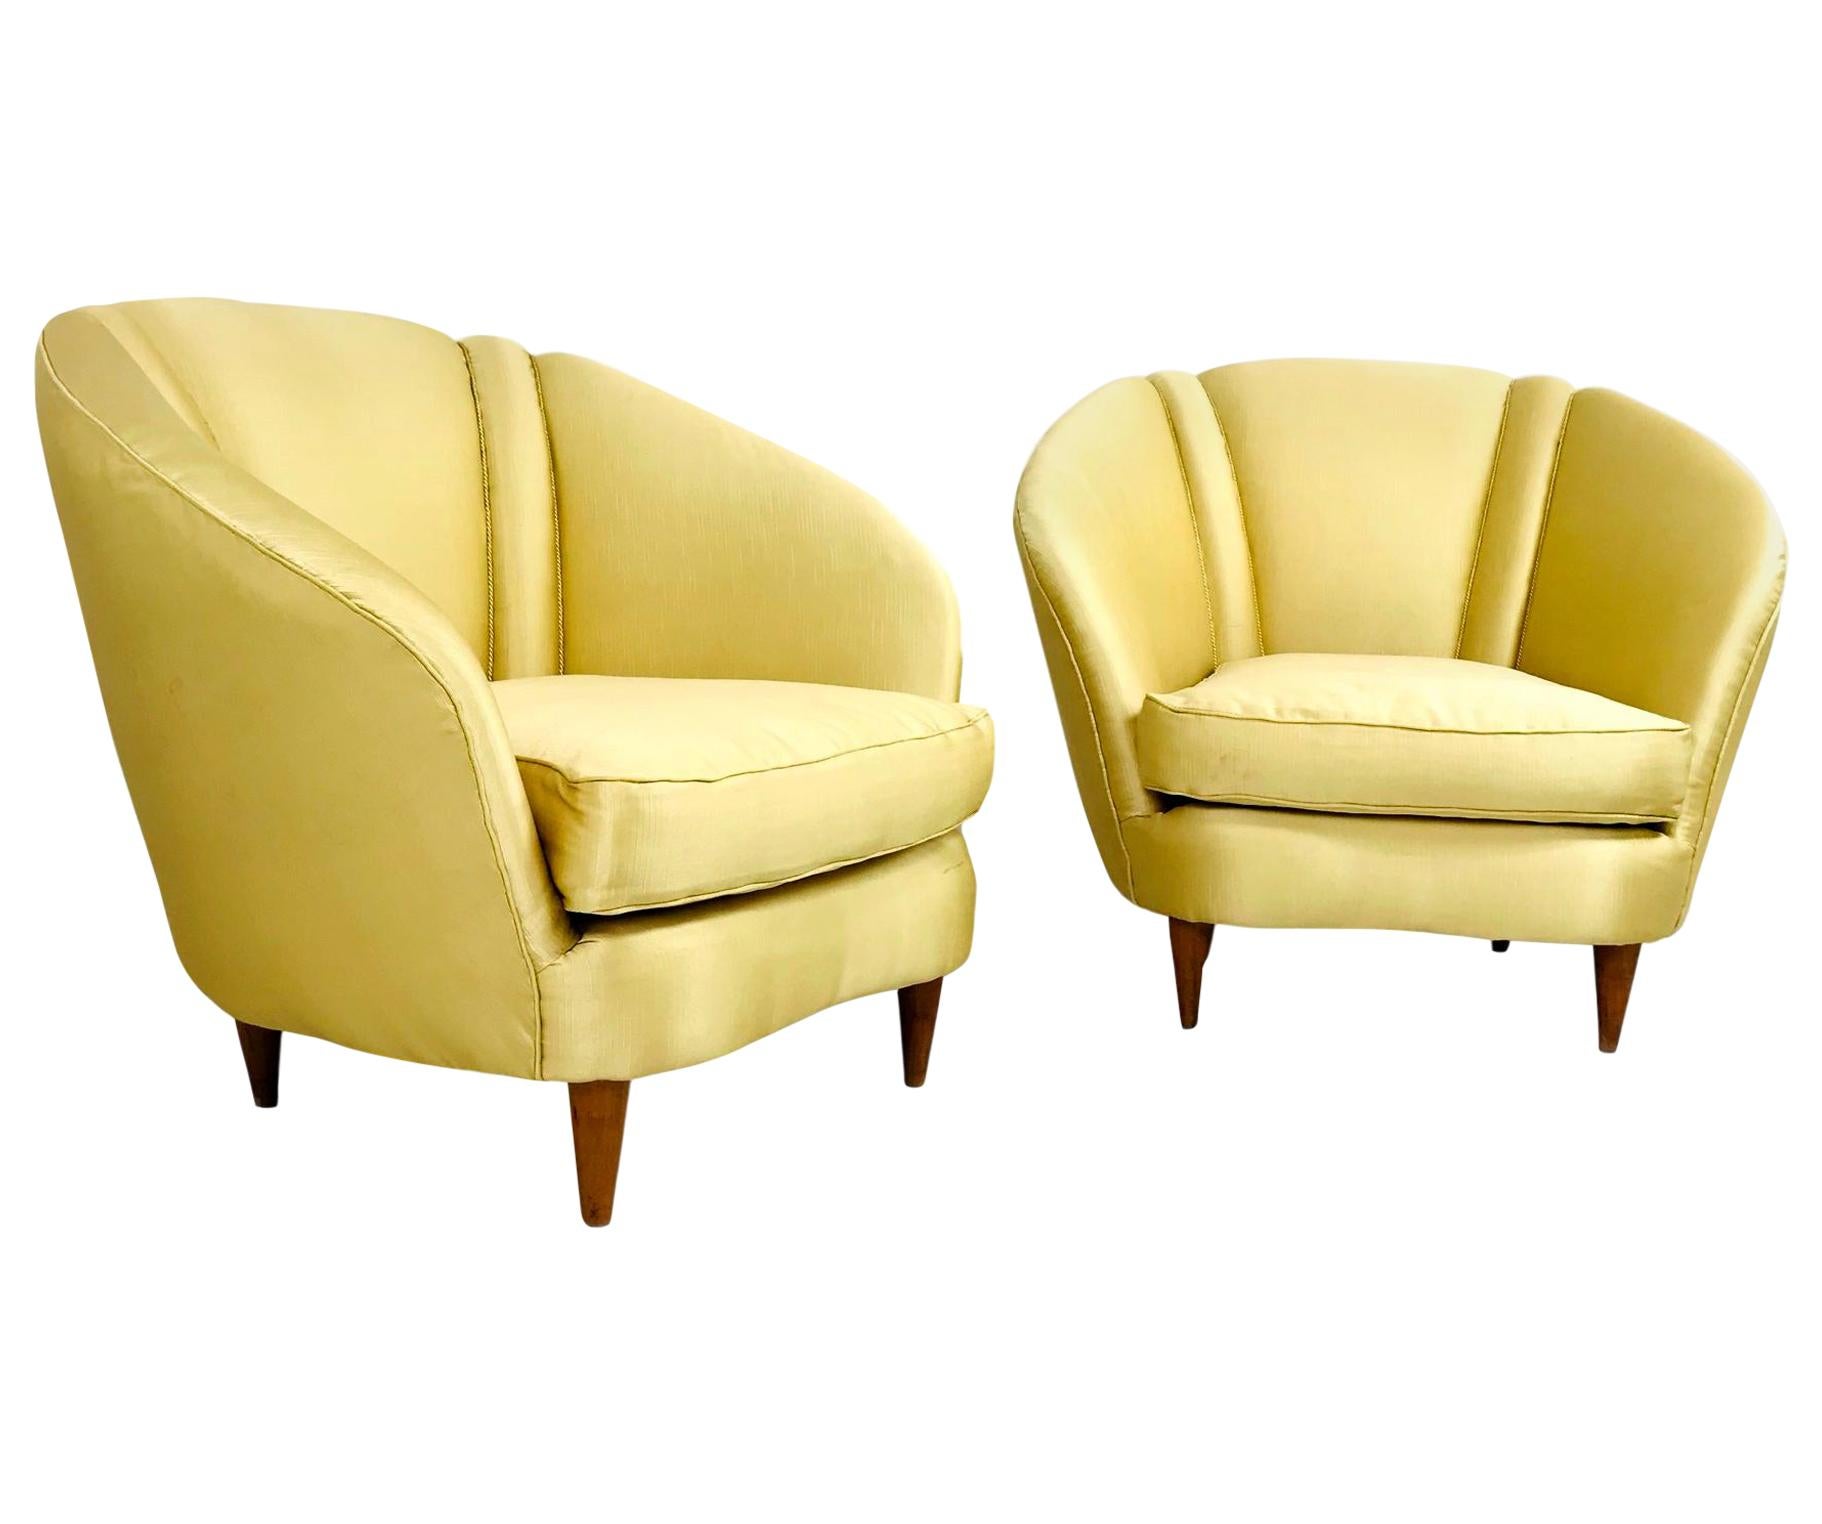 Pair of Midcentury Italian Lounge Chairs with Lotus Forms